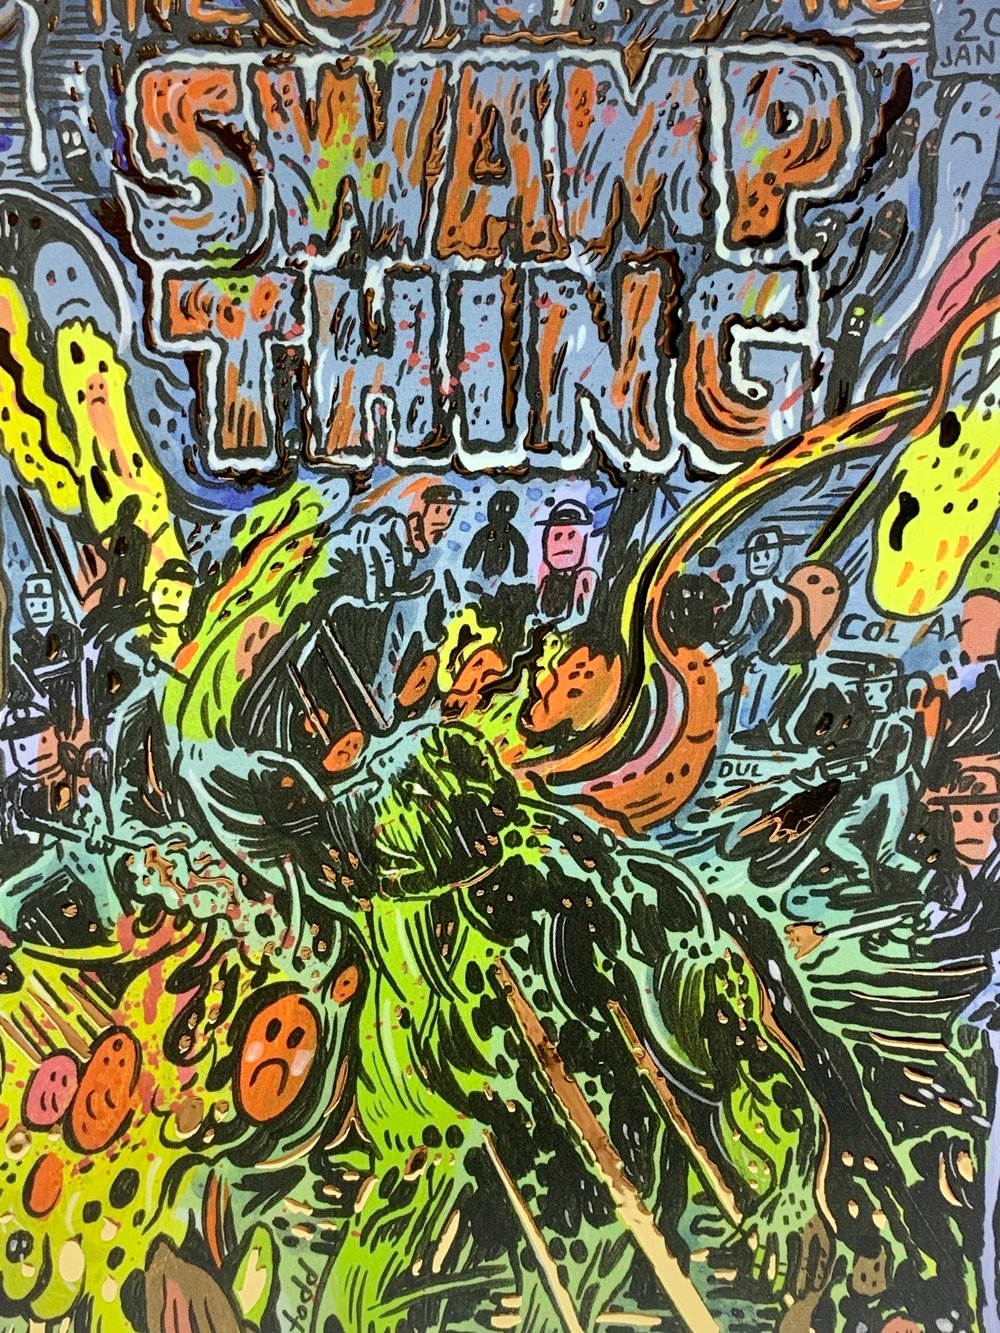 Image of (Mark Todd) Saga of the Swamp Thing with Gold Foil